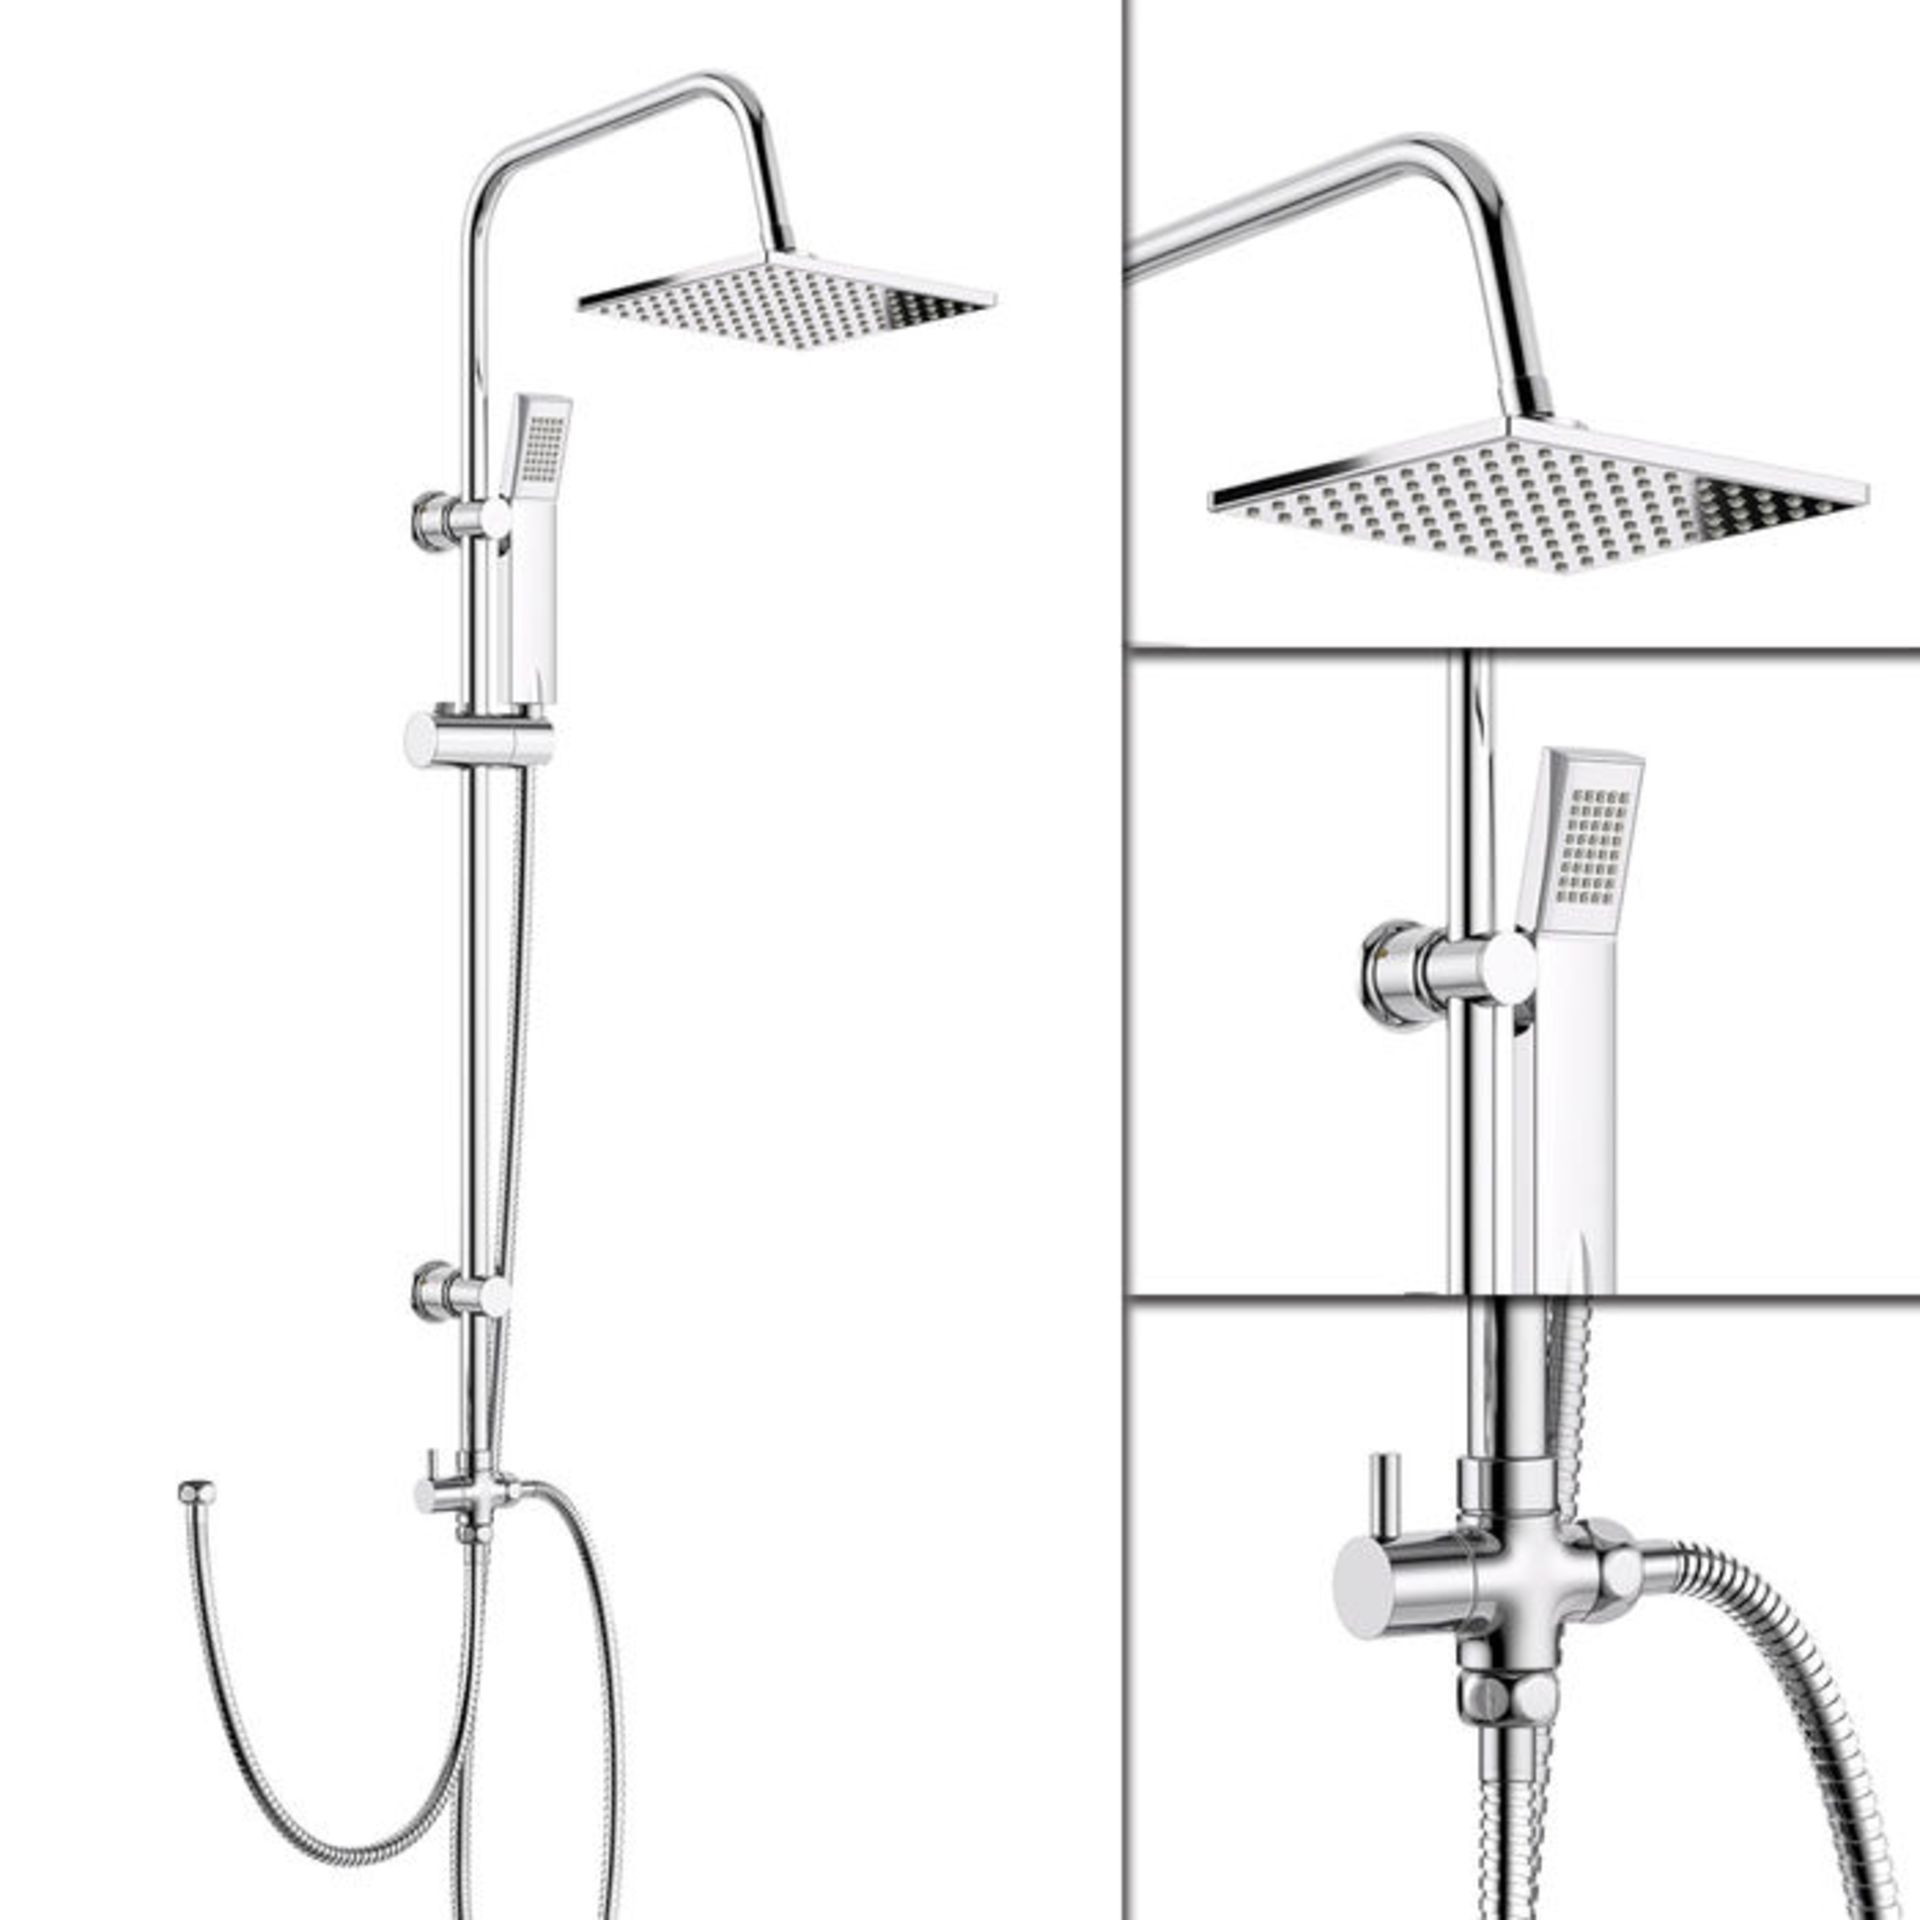 (P160) 200mm Square Head, Riser Rail Handheld Kit. Quality stainless steel shower head with Easy - Bild 3 aus 4